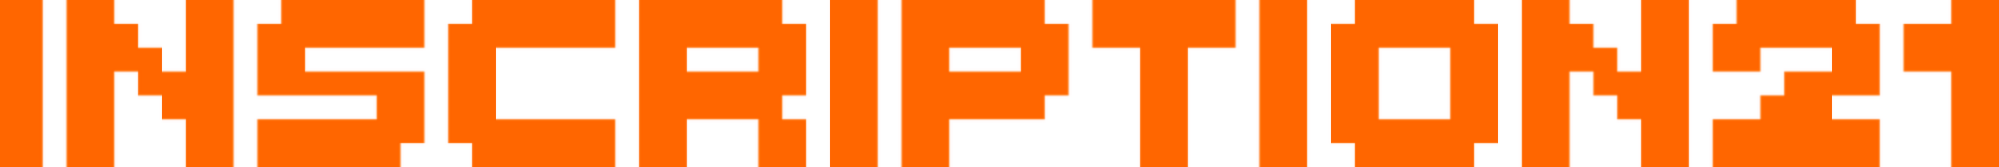 A graphic of the words "Inscription21" in orange. 